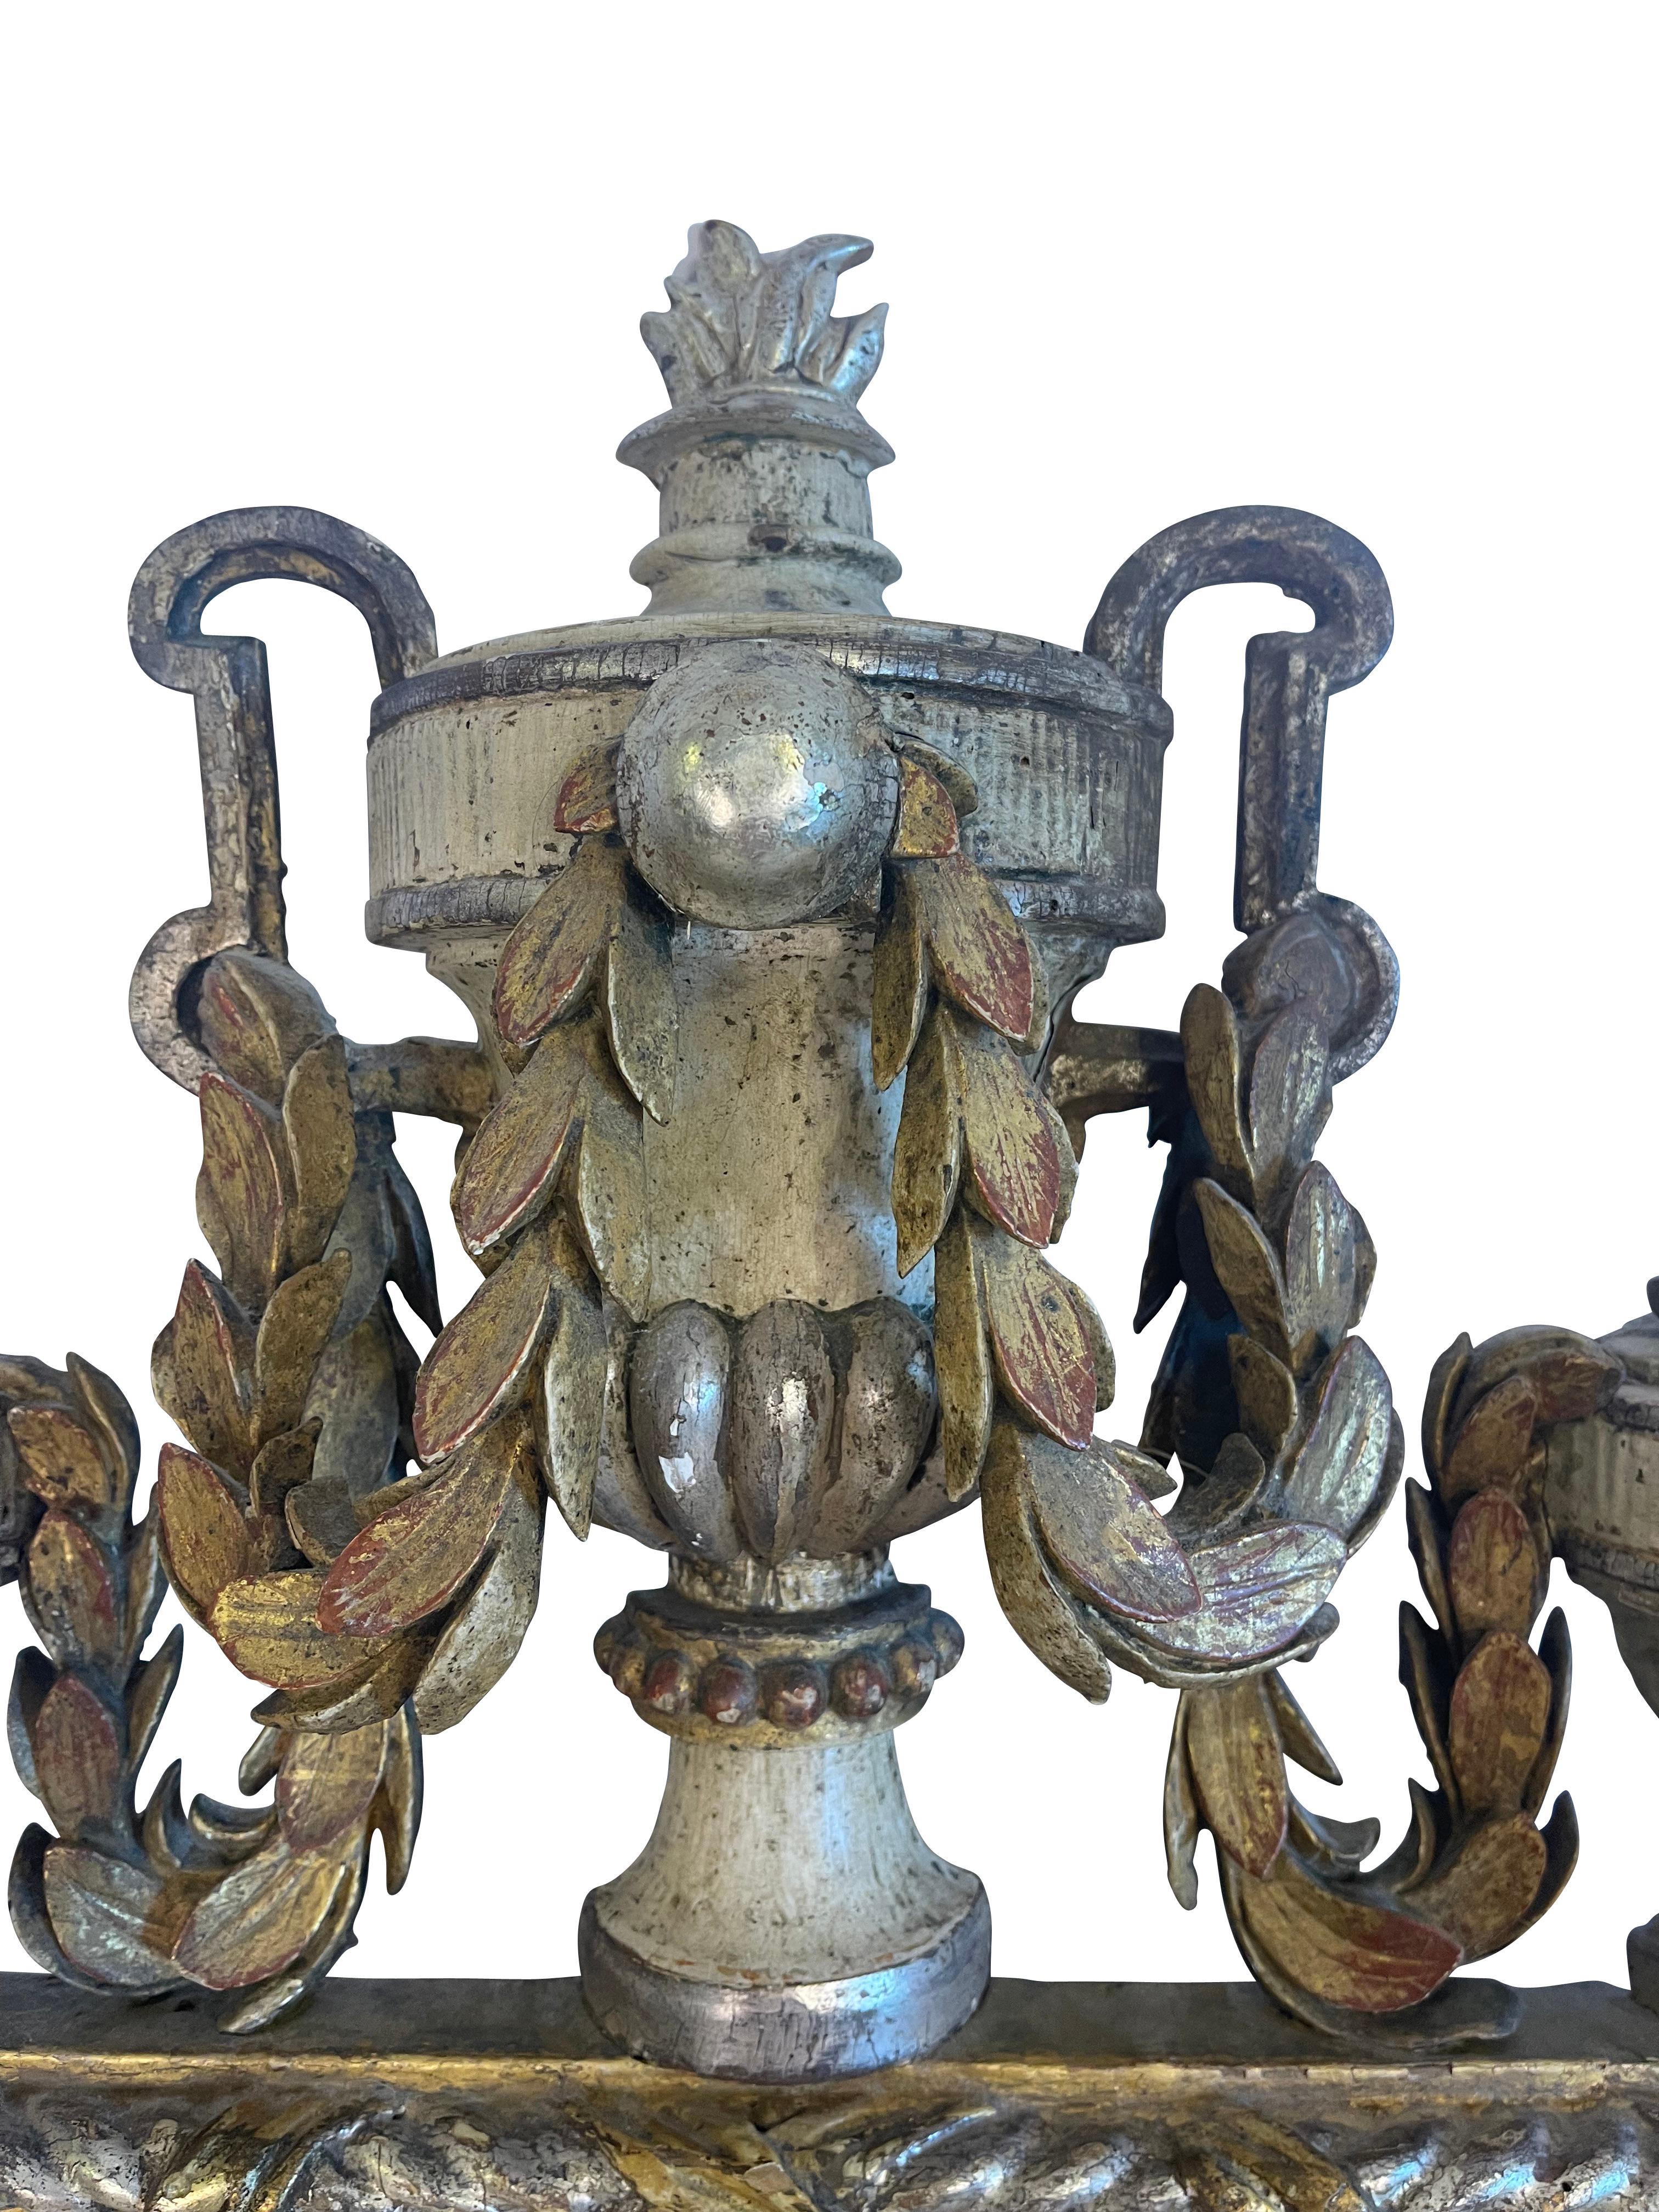 Swedish neoclassical giltwood and silvered mirror with original glass. The mirror is highly decorative, with three carved urns adorning the top of the mirror with laurel swags throughout. The central urn features double handles and a carved flame